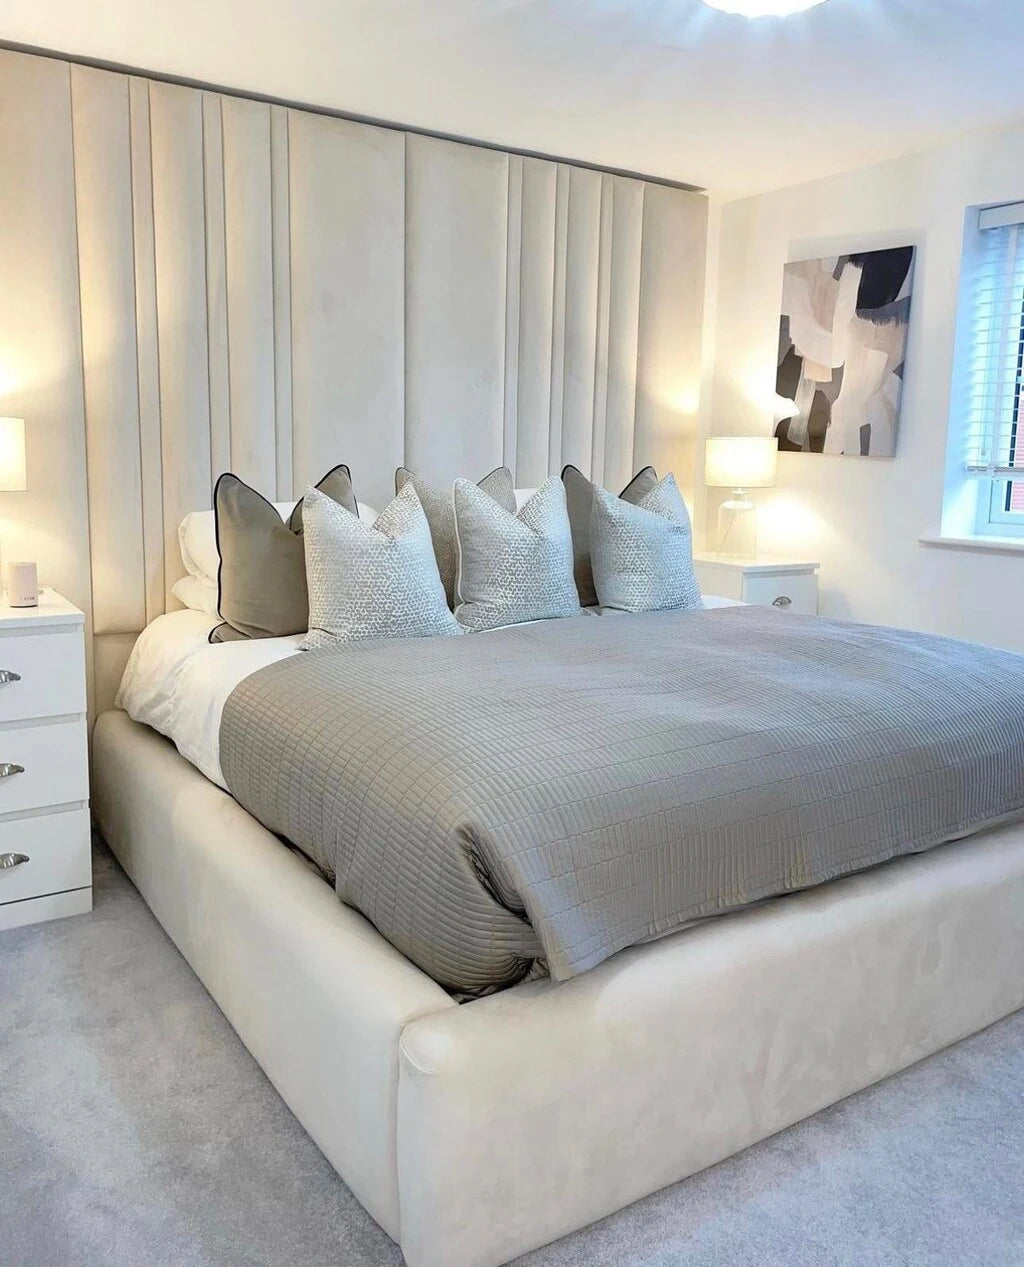 The Bespoke Kensington II Bed - Fully Customisable with Storage Options- Luxe Range